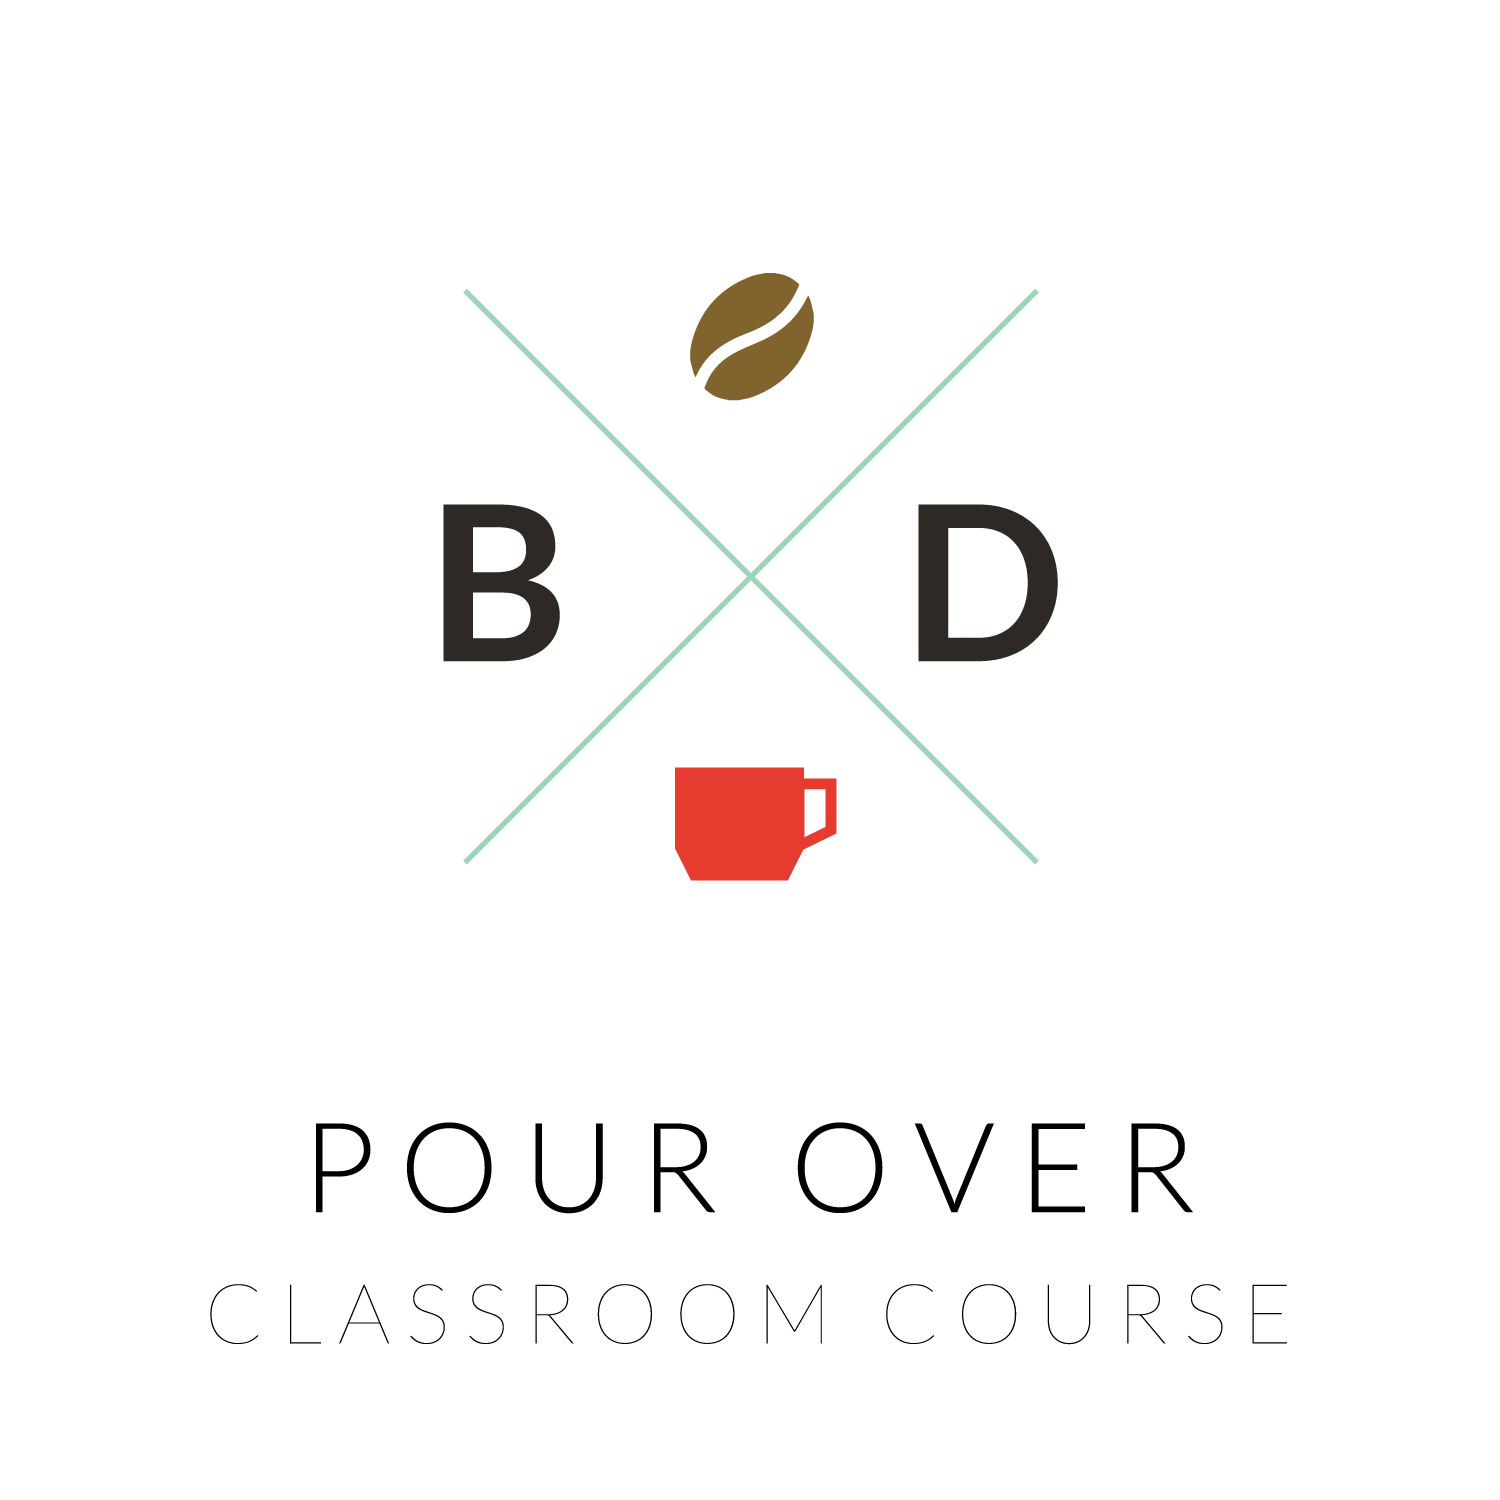 POUROVER-01.png